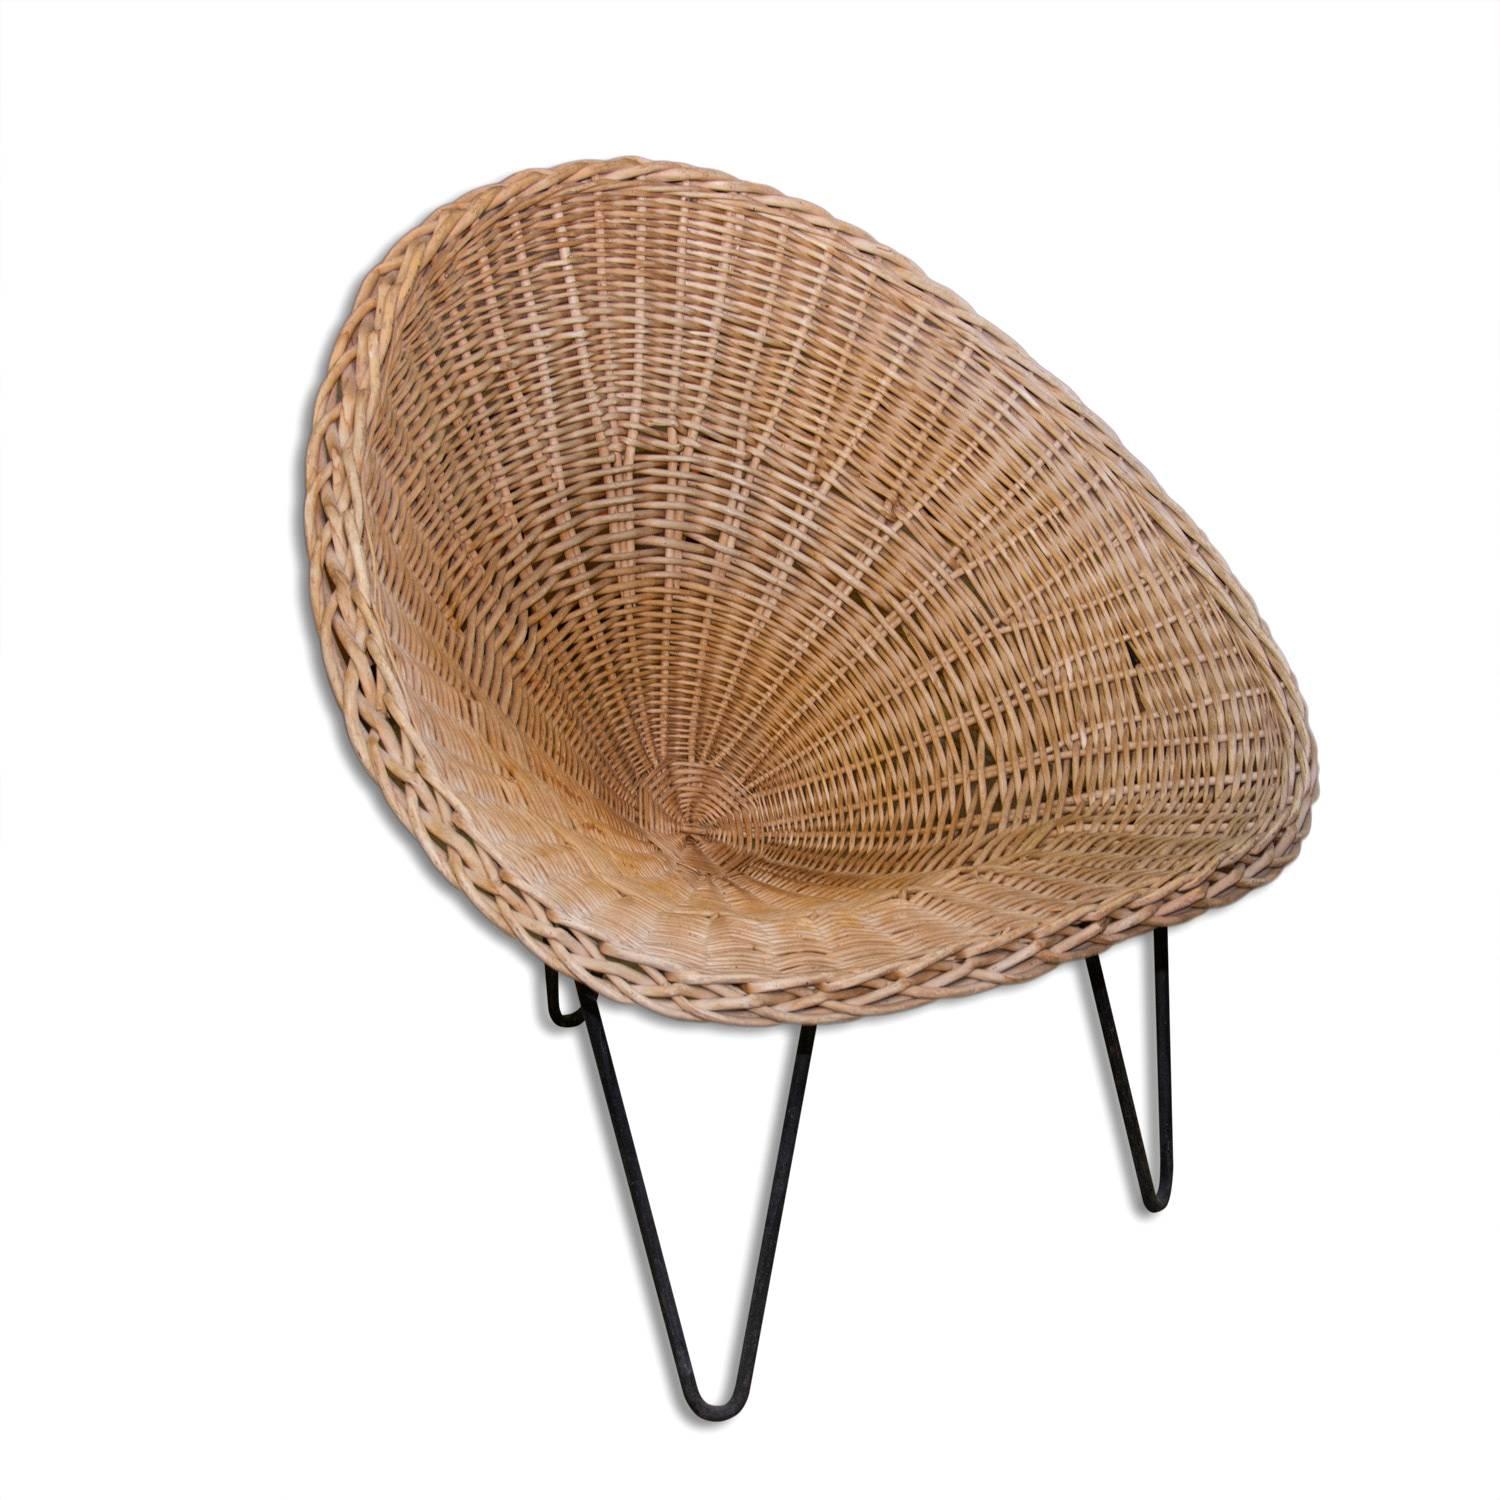 Midcentury lounge chair with an egg-shaped wicker seat. It was made at the turn of 1950s-960s in France. It features a high quality wicker seat and a black metal three-legged base
In very good original condition with preservation a beautiful patina.